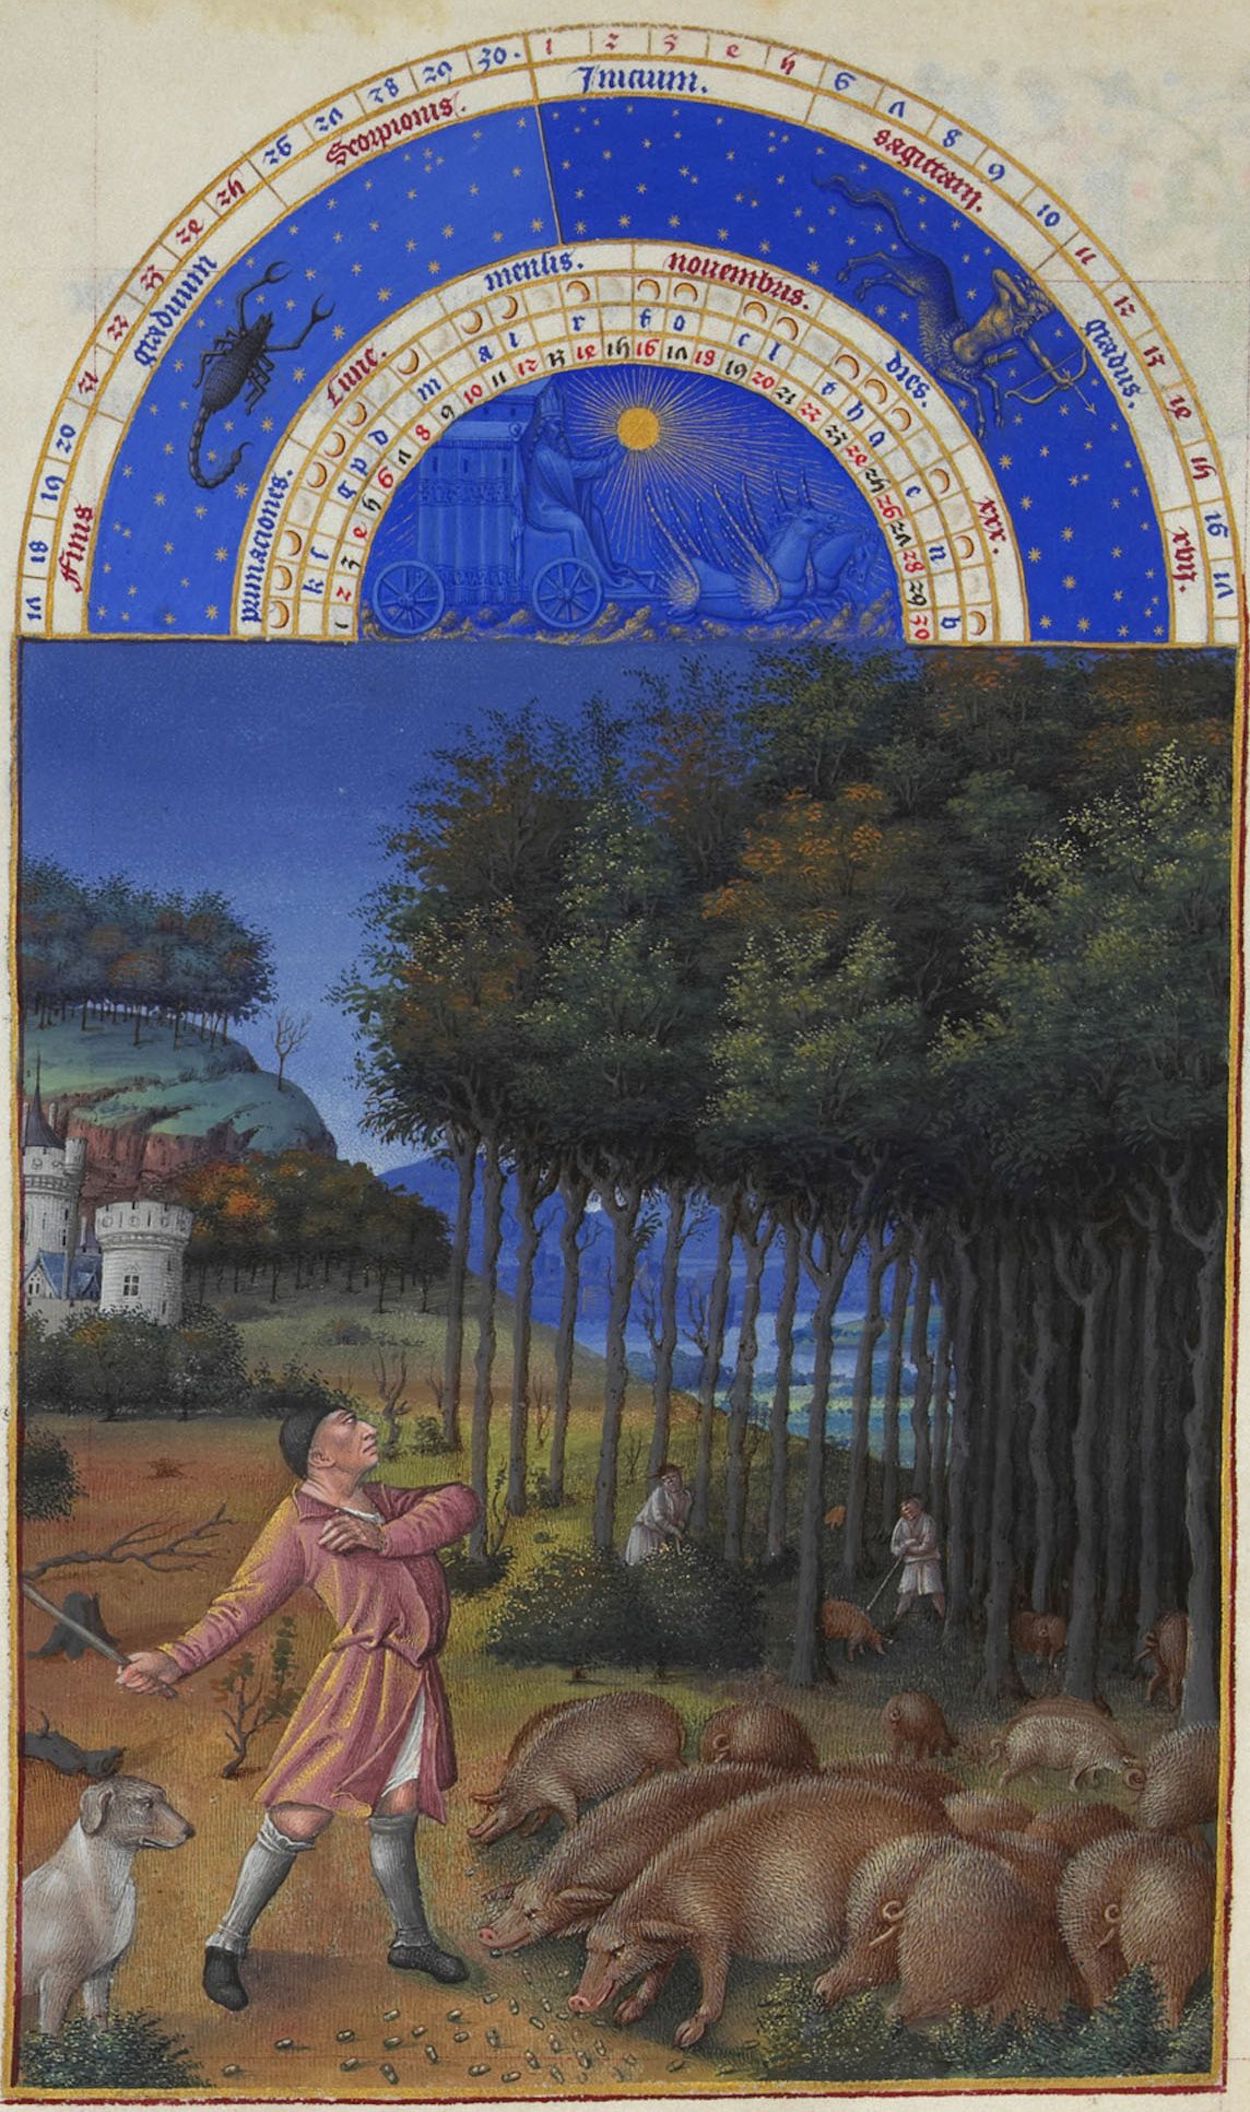 Les Très Riches Heures: November by The Limbourg Brothers - between 1485 and 1486 - 22.5 x 13.6 cm Musée Condé